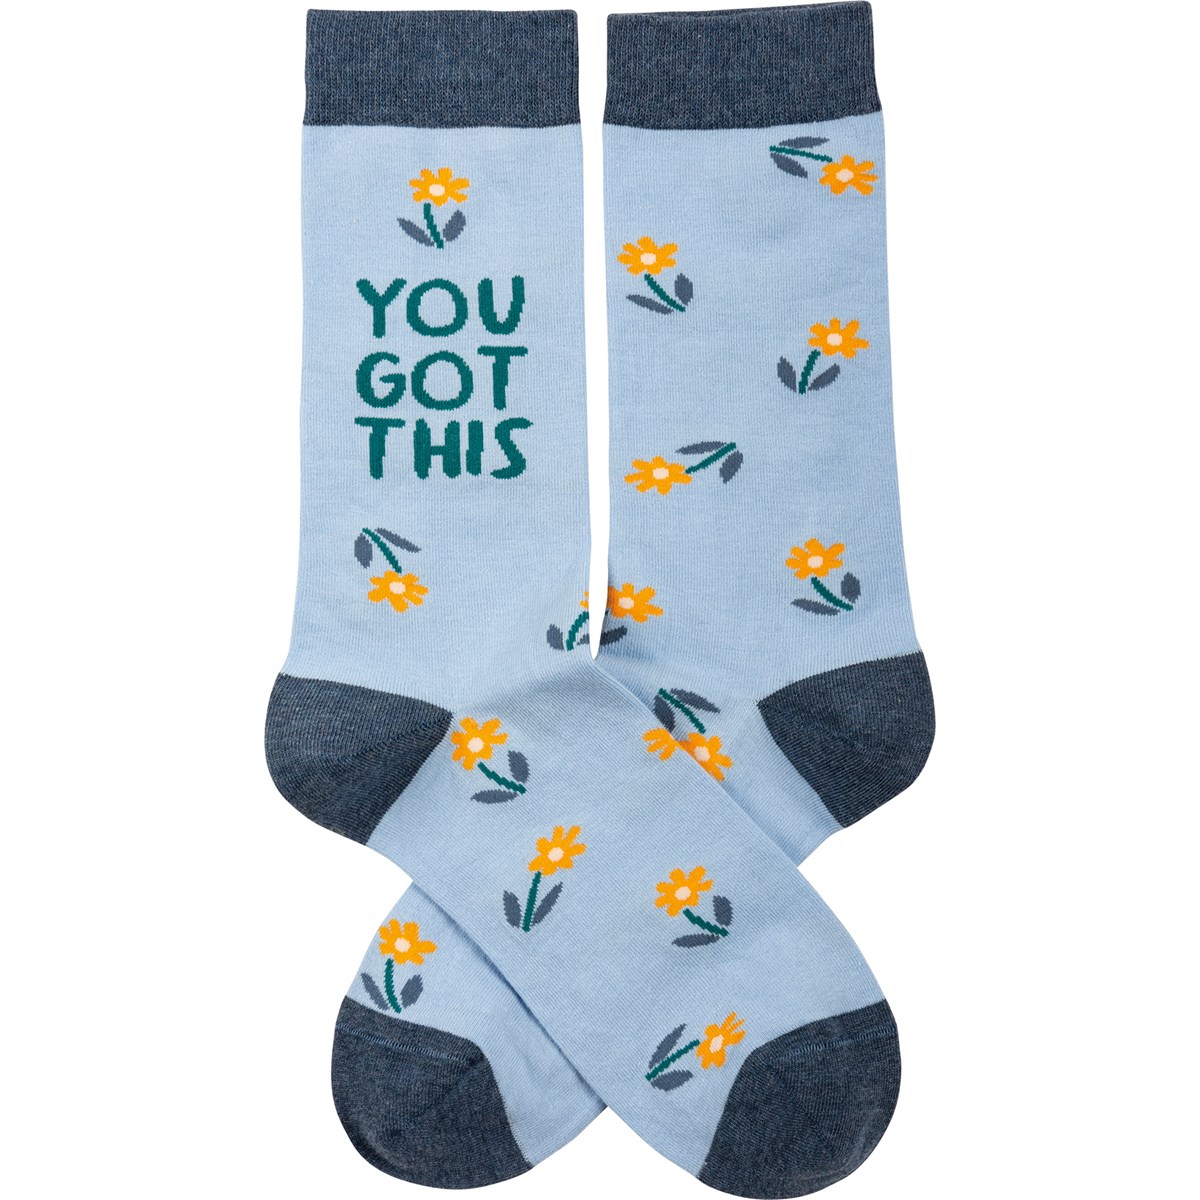 Socks - You Got This - One Size Fits Most - Cotton, Nylon, Spandex